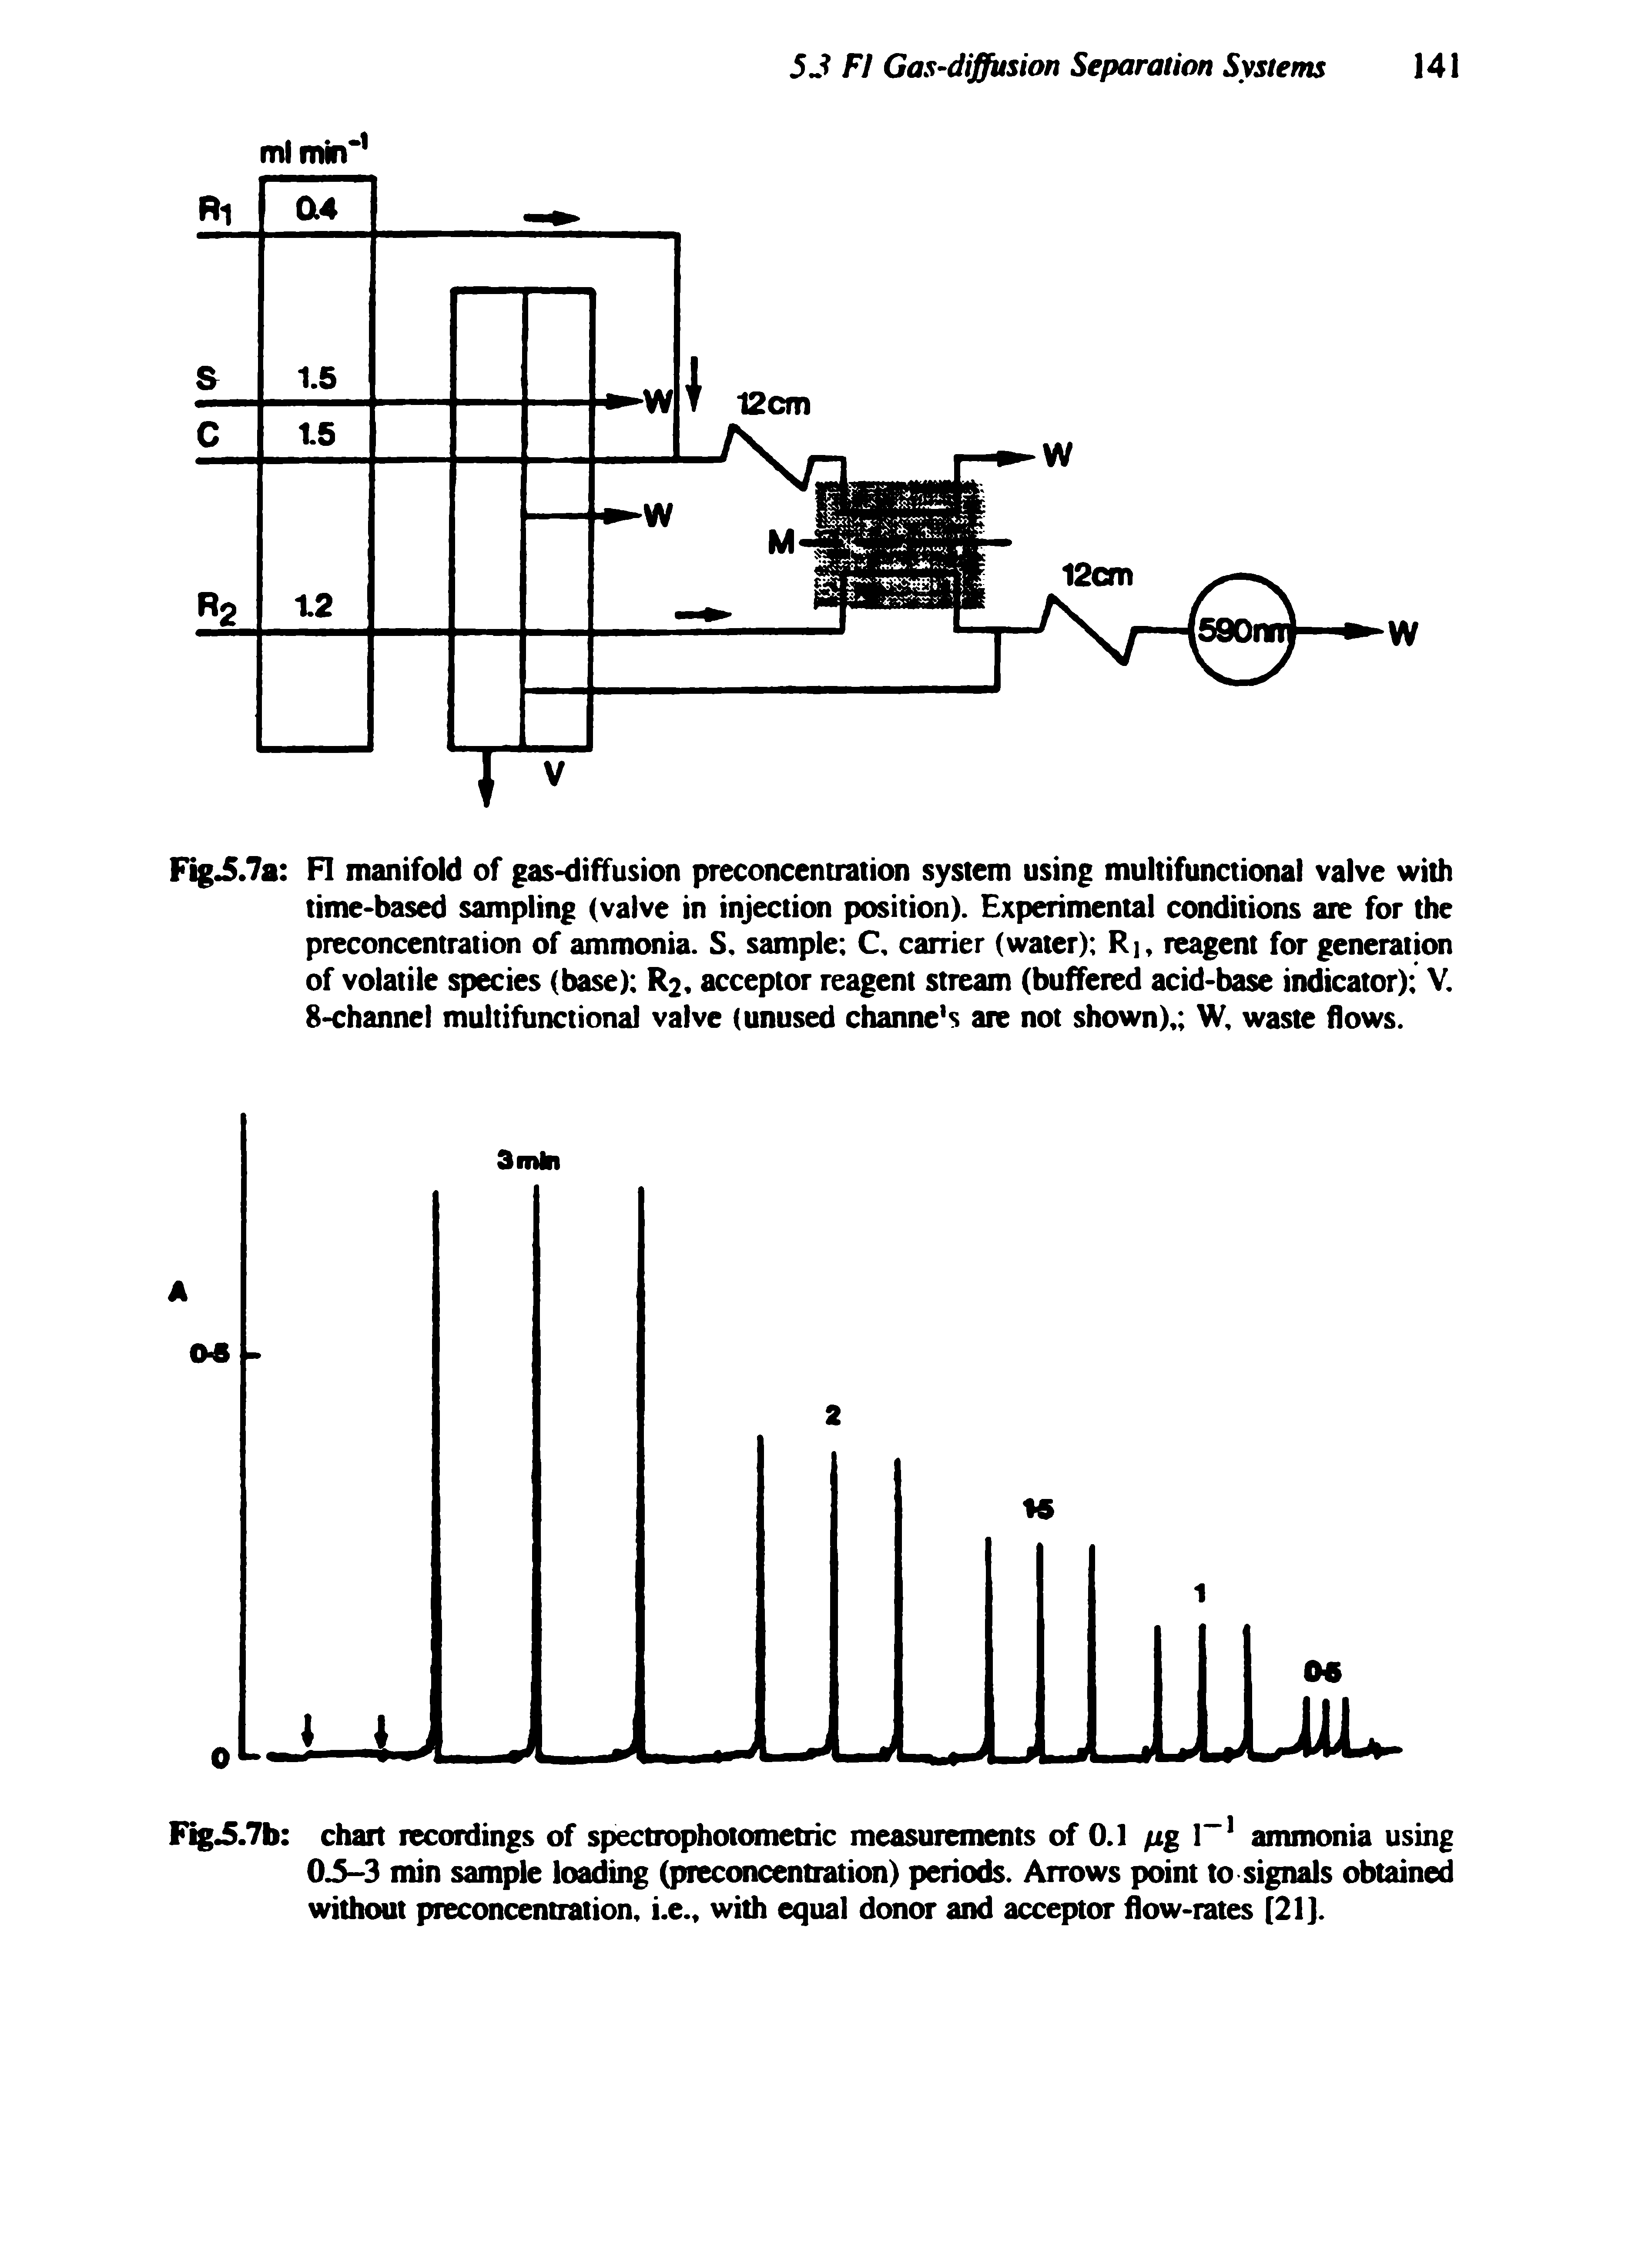 Fig. 7a FI manifold of gas-diffusion preconcentration system using multifunctional valve with time-based sampling (valve in injection position). Experimental conditions are for the preconcentration of ammonia. S. sample C, carrier (water) R], reagent for generation of volatile species (base) R2, acceptor reagent stream (buffered acid-base indicator) V.